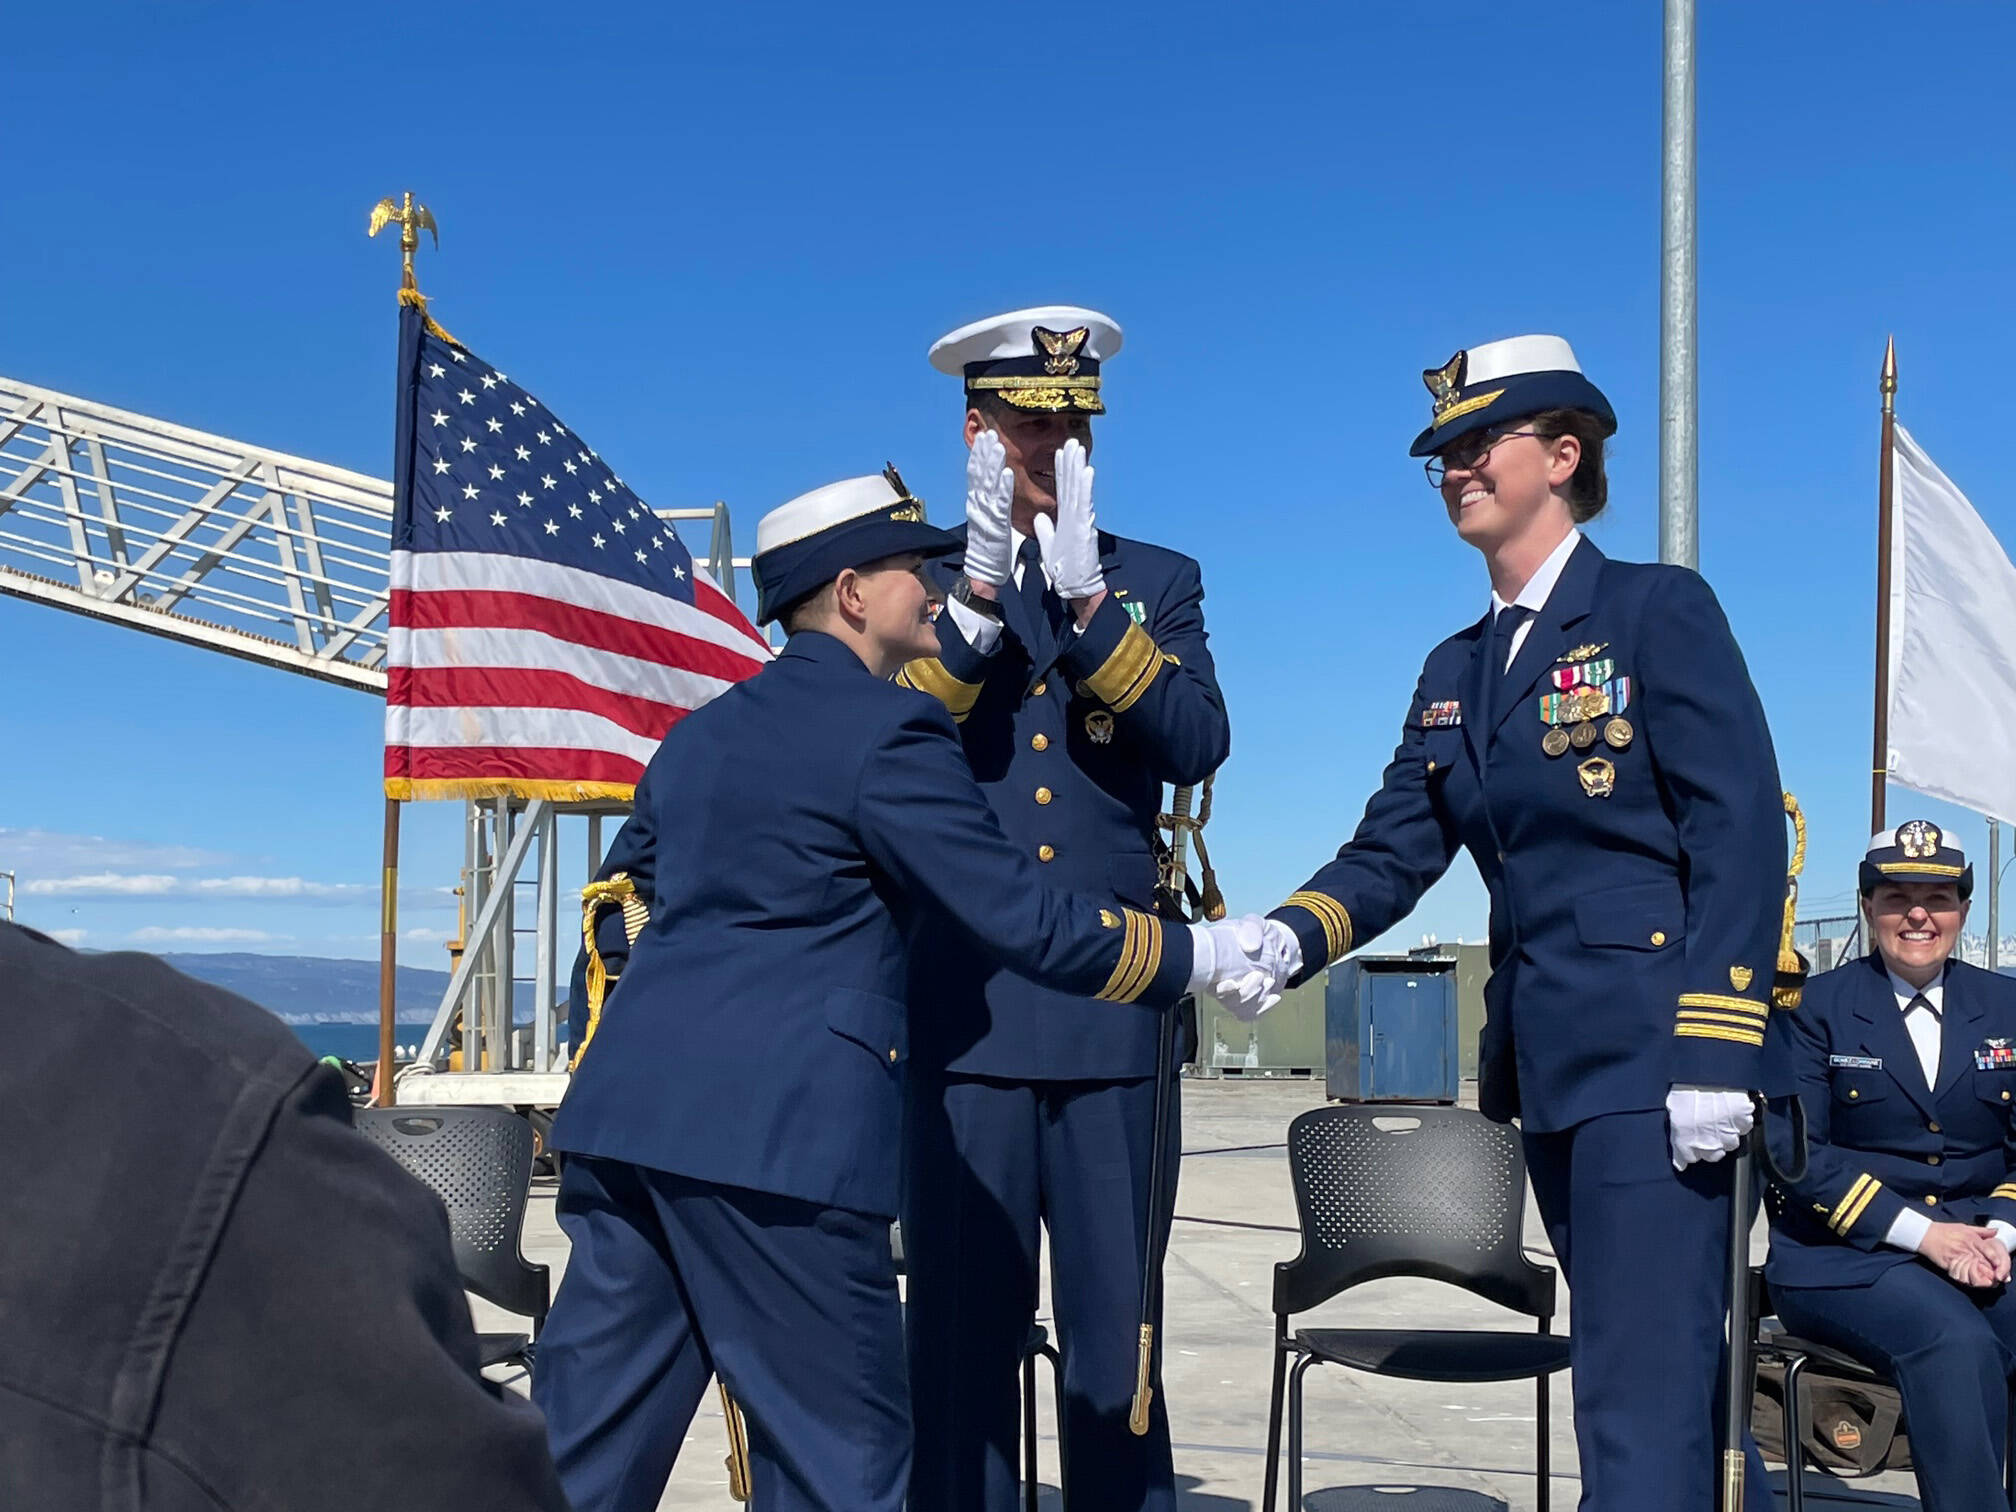 Commander Jeannette Greene, left, turns over command of the USCGC Hickory to Lt. Commander Shea Winterberger at the May 19, 2022, change of command ceremony in Homer, Alaska. (Photo by McKibben Jackinsky)